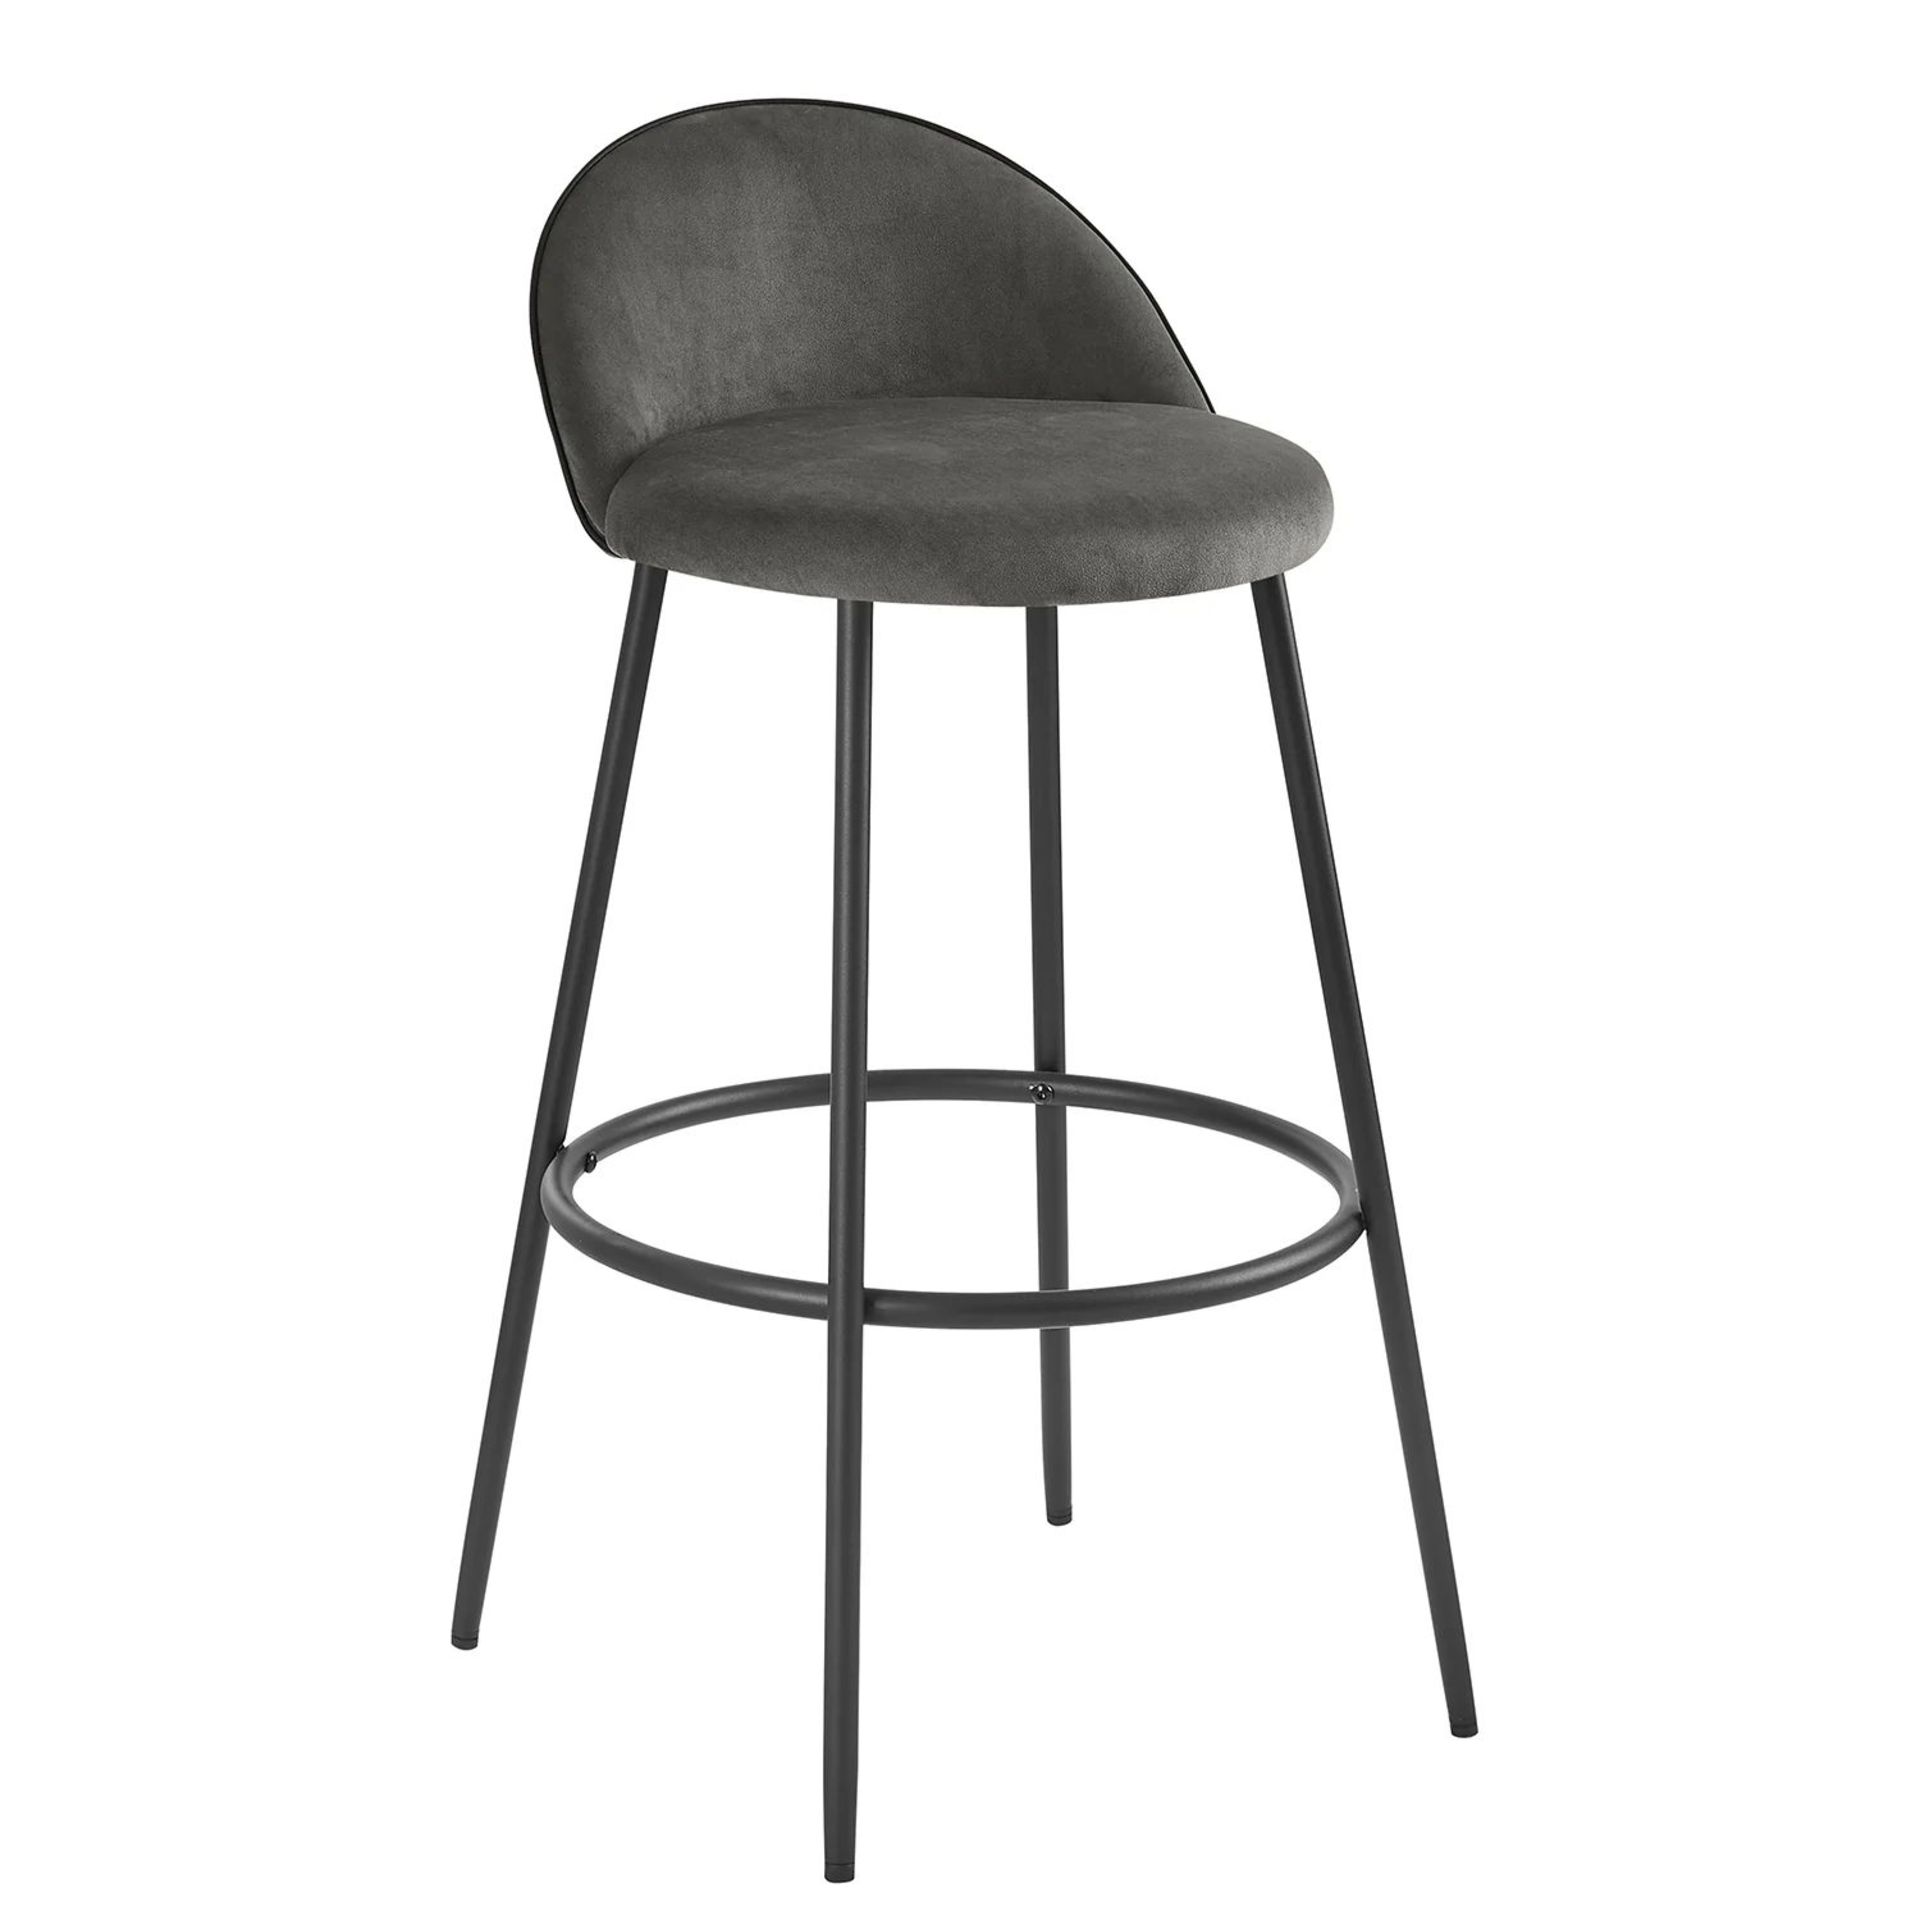 Barton Set of 2 Grey Velvet Upholstered Bar Stools with Contrast Piping. - R14. RRP £199.99. Our - Image 2 of 2